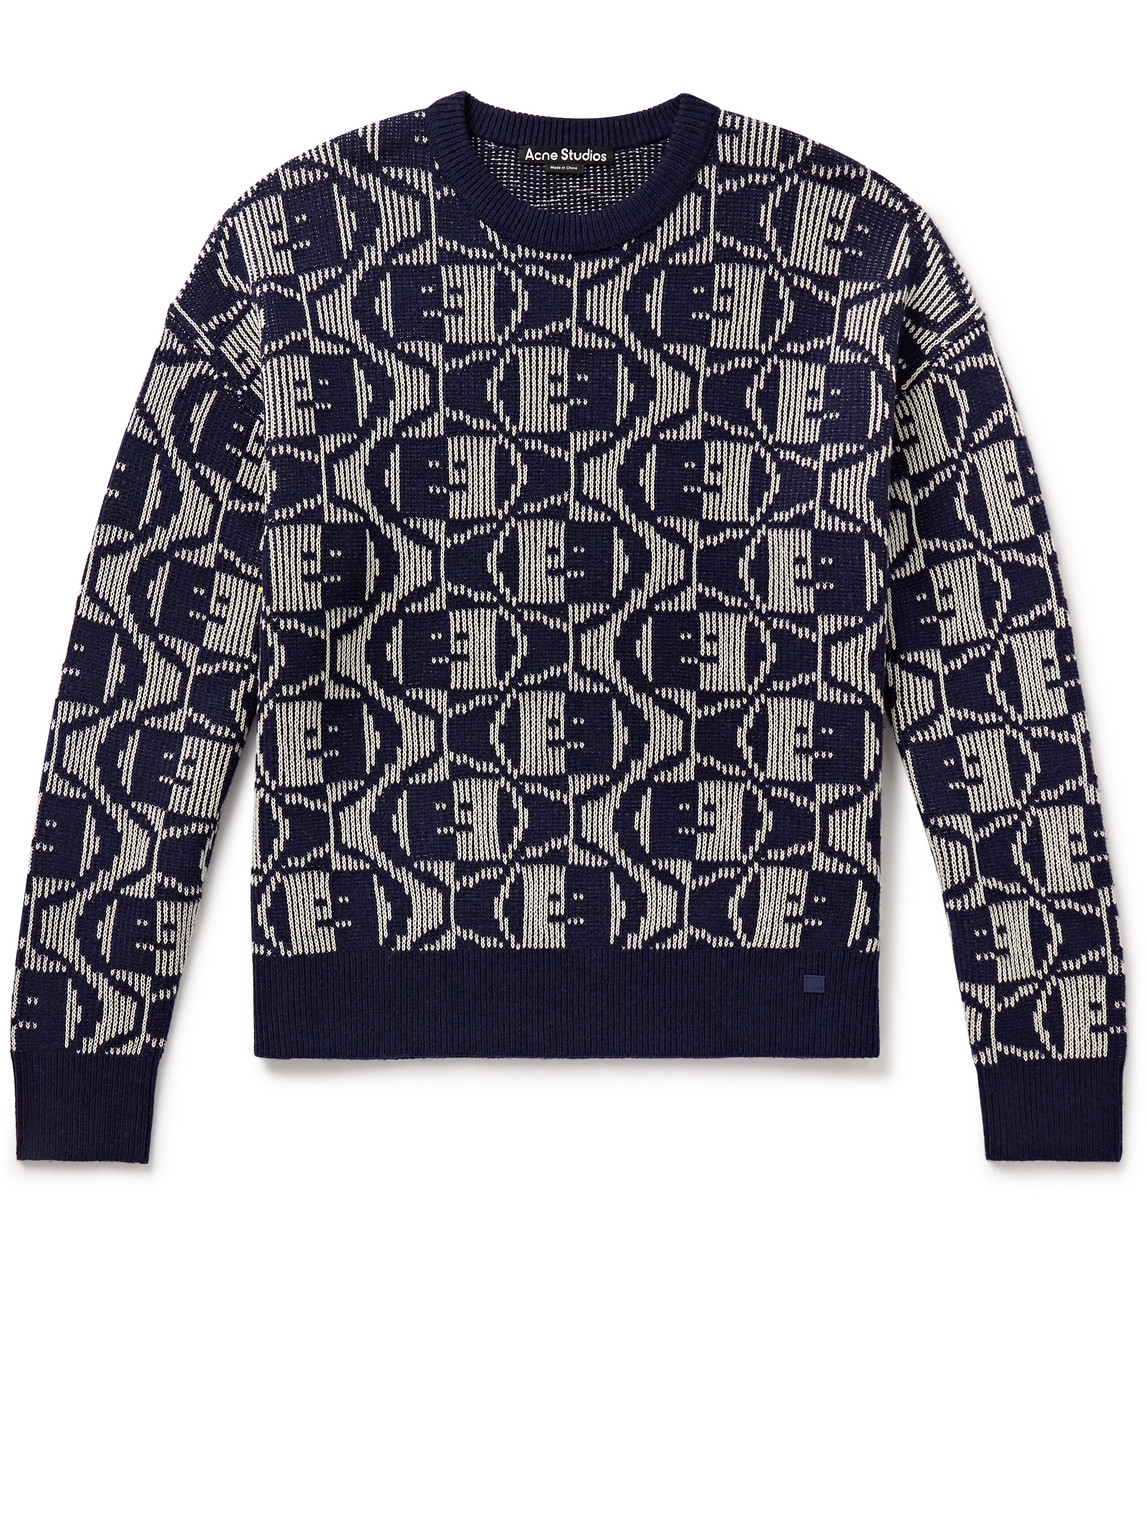 ACNE STUDIOS KATCH WOOL AND COTTON-BLEND JACQUARD-KNIT SWEATER